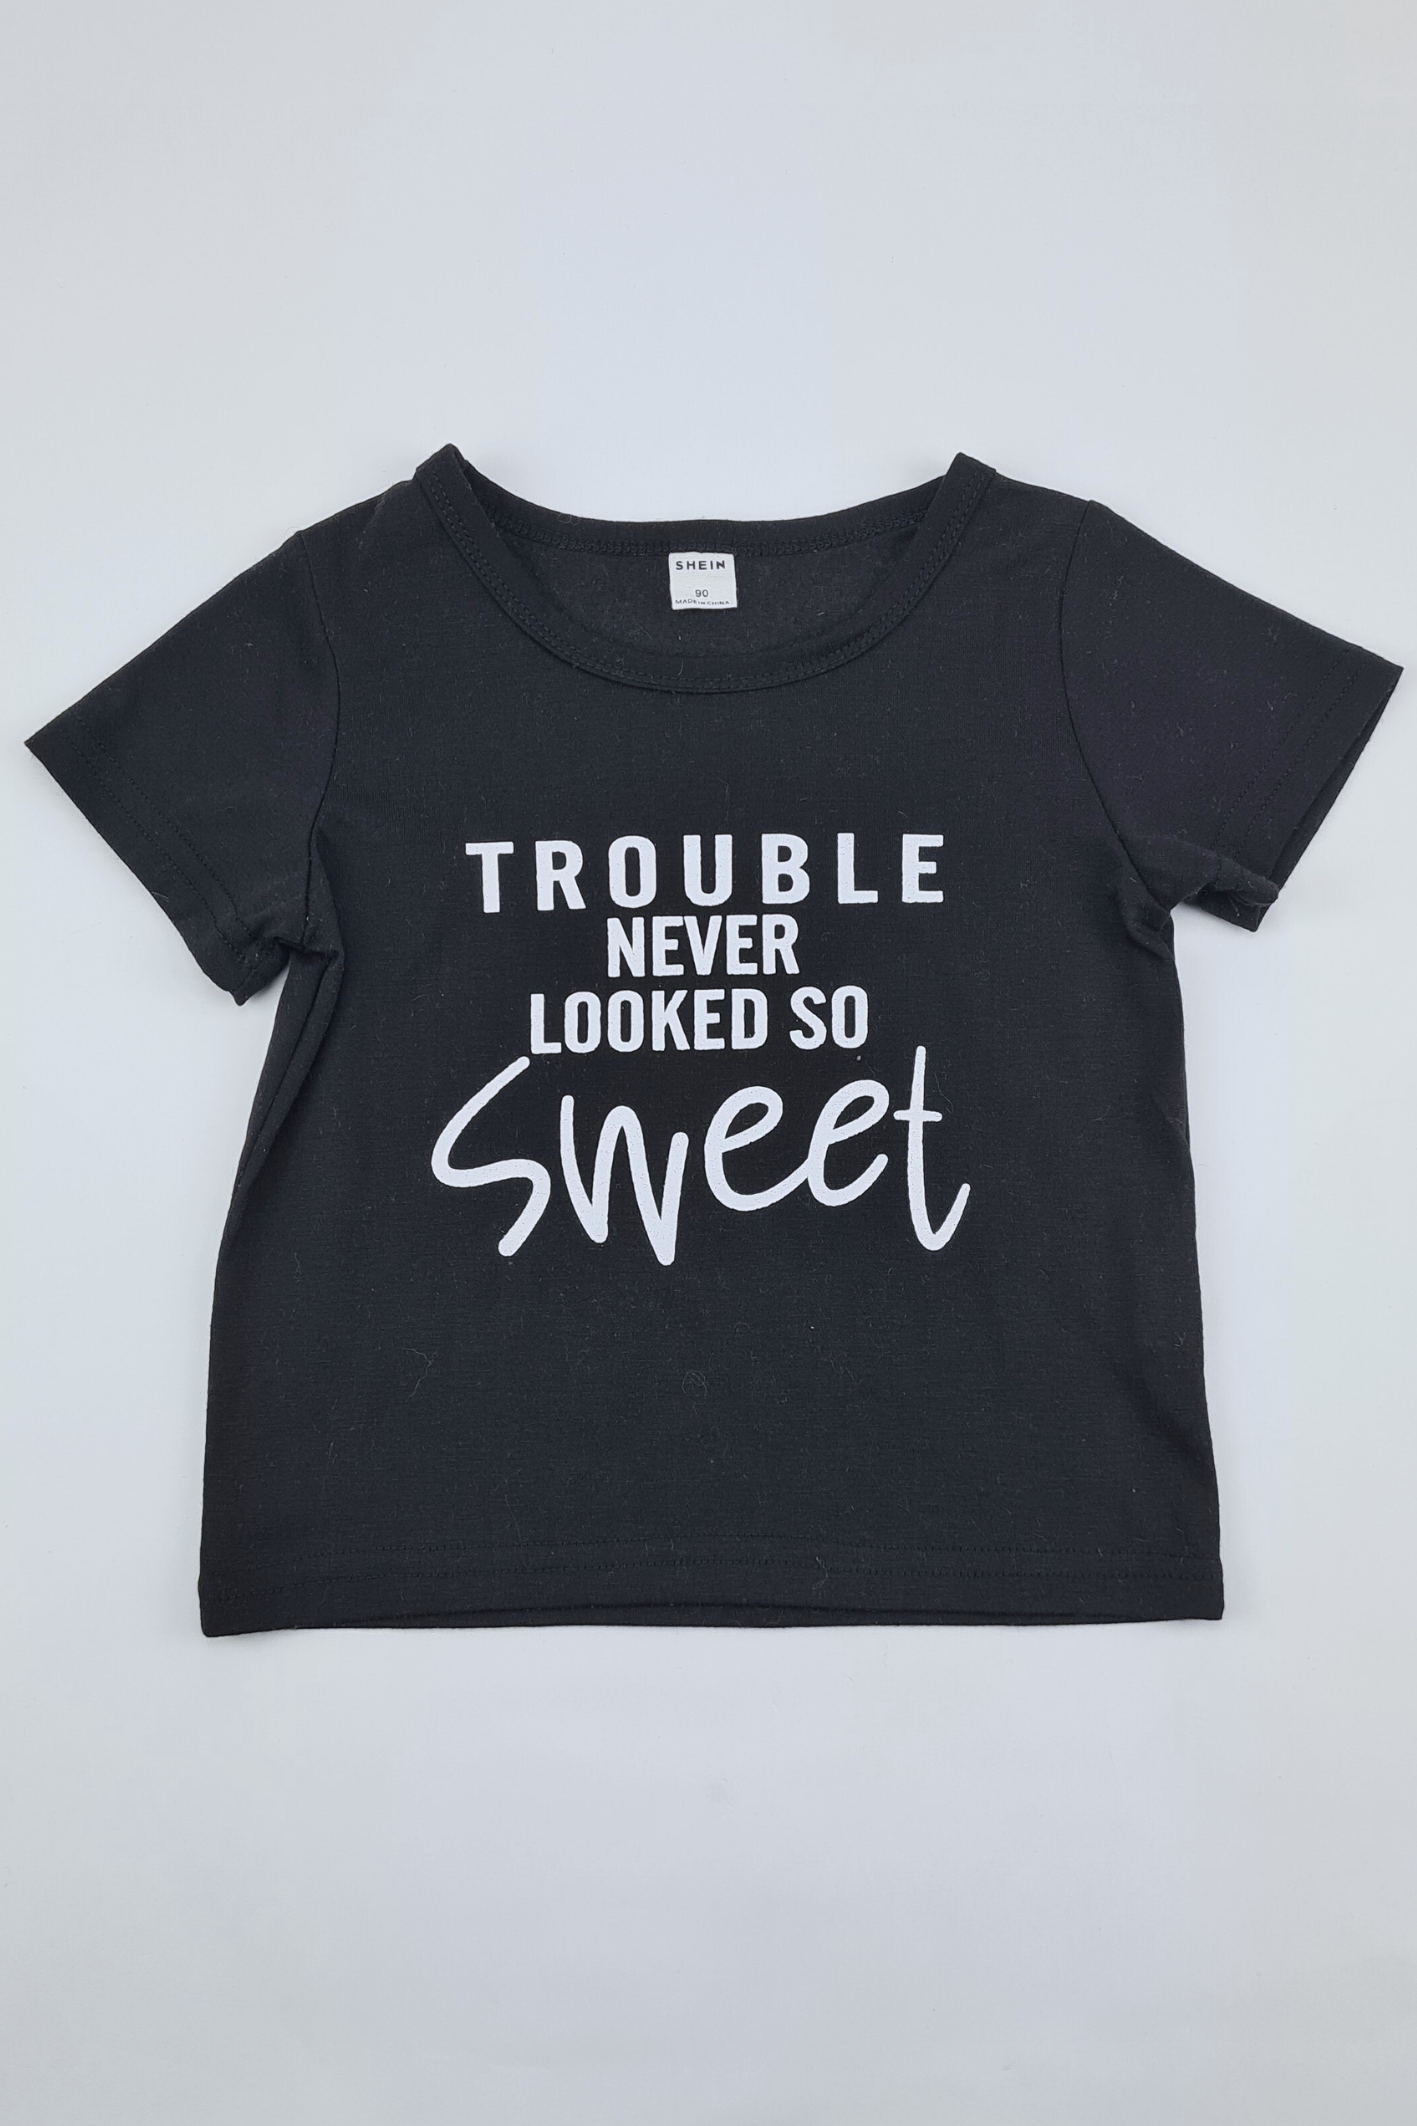 2y - Trouble Never Looked So Sweet T-shirt